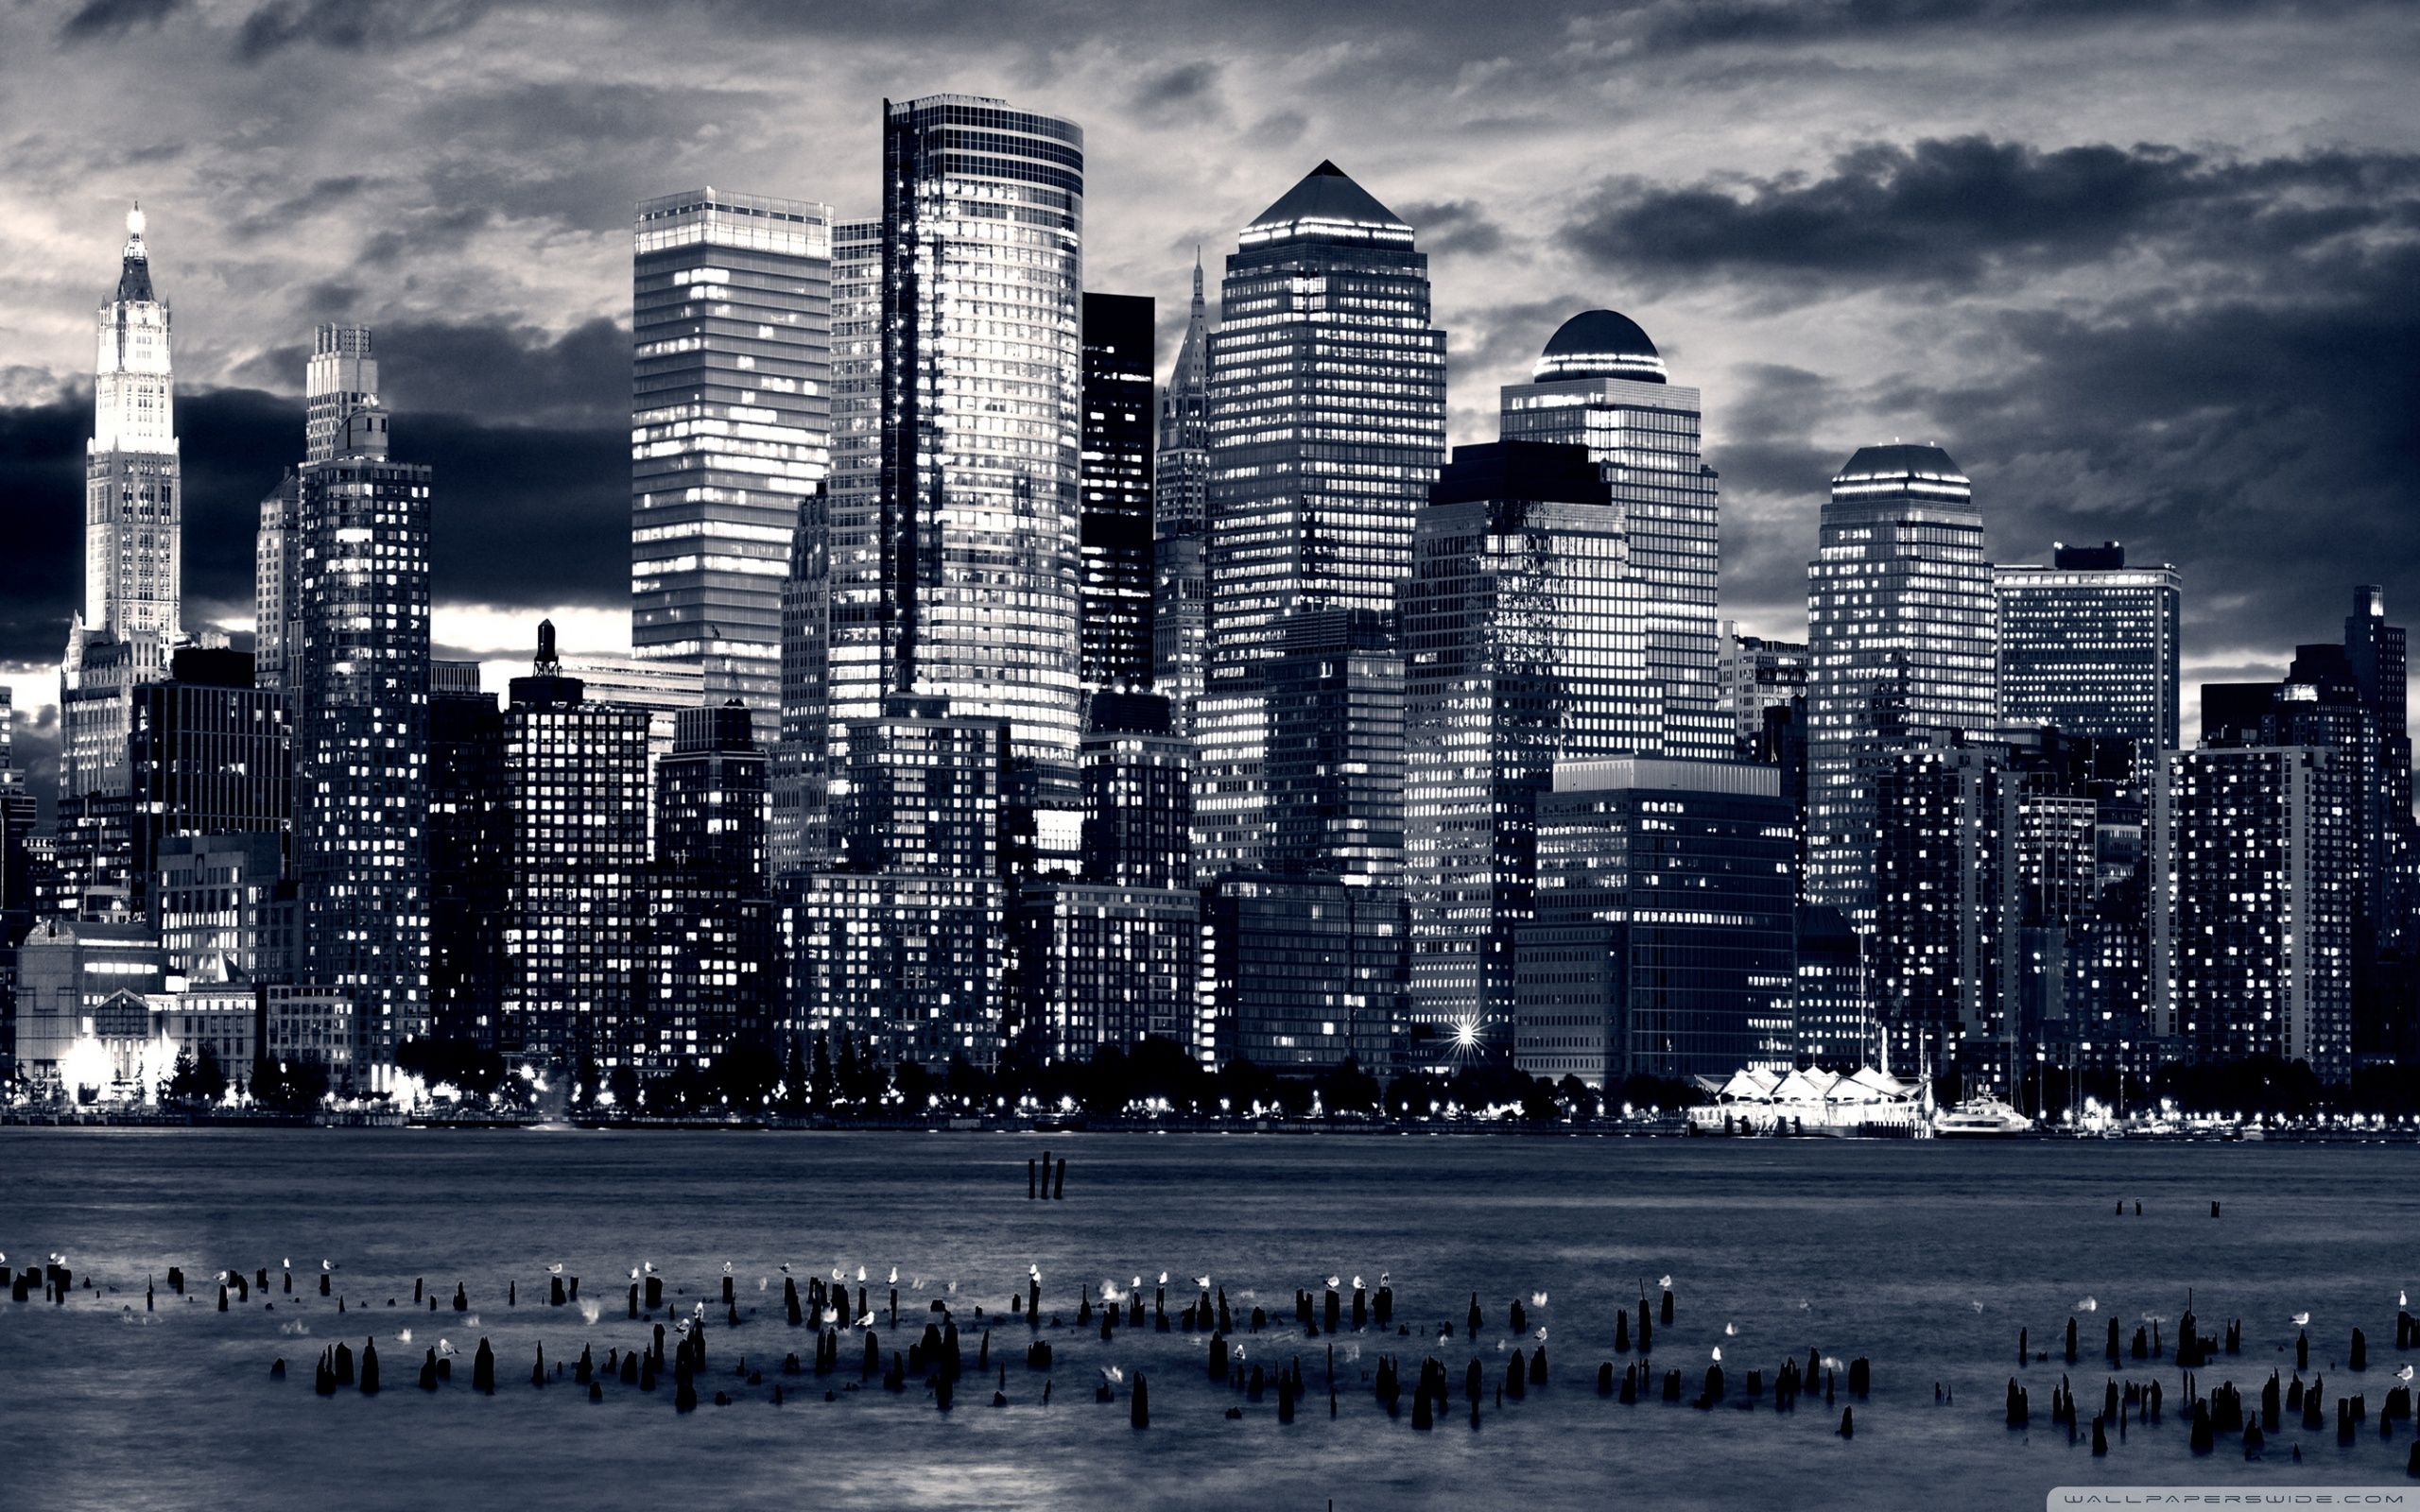 2560x1600 Manhattan Panorama In Black And White Ultra Hd Desktop Background Wallpaper For 4k Uhd Tv Tablet Smartphone